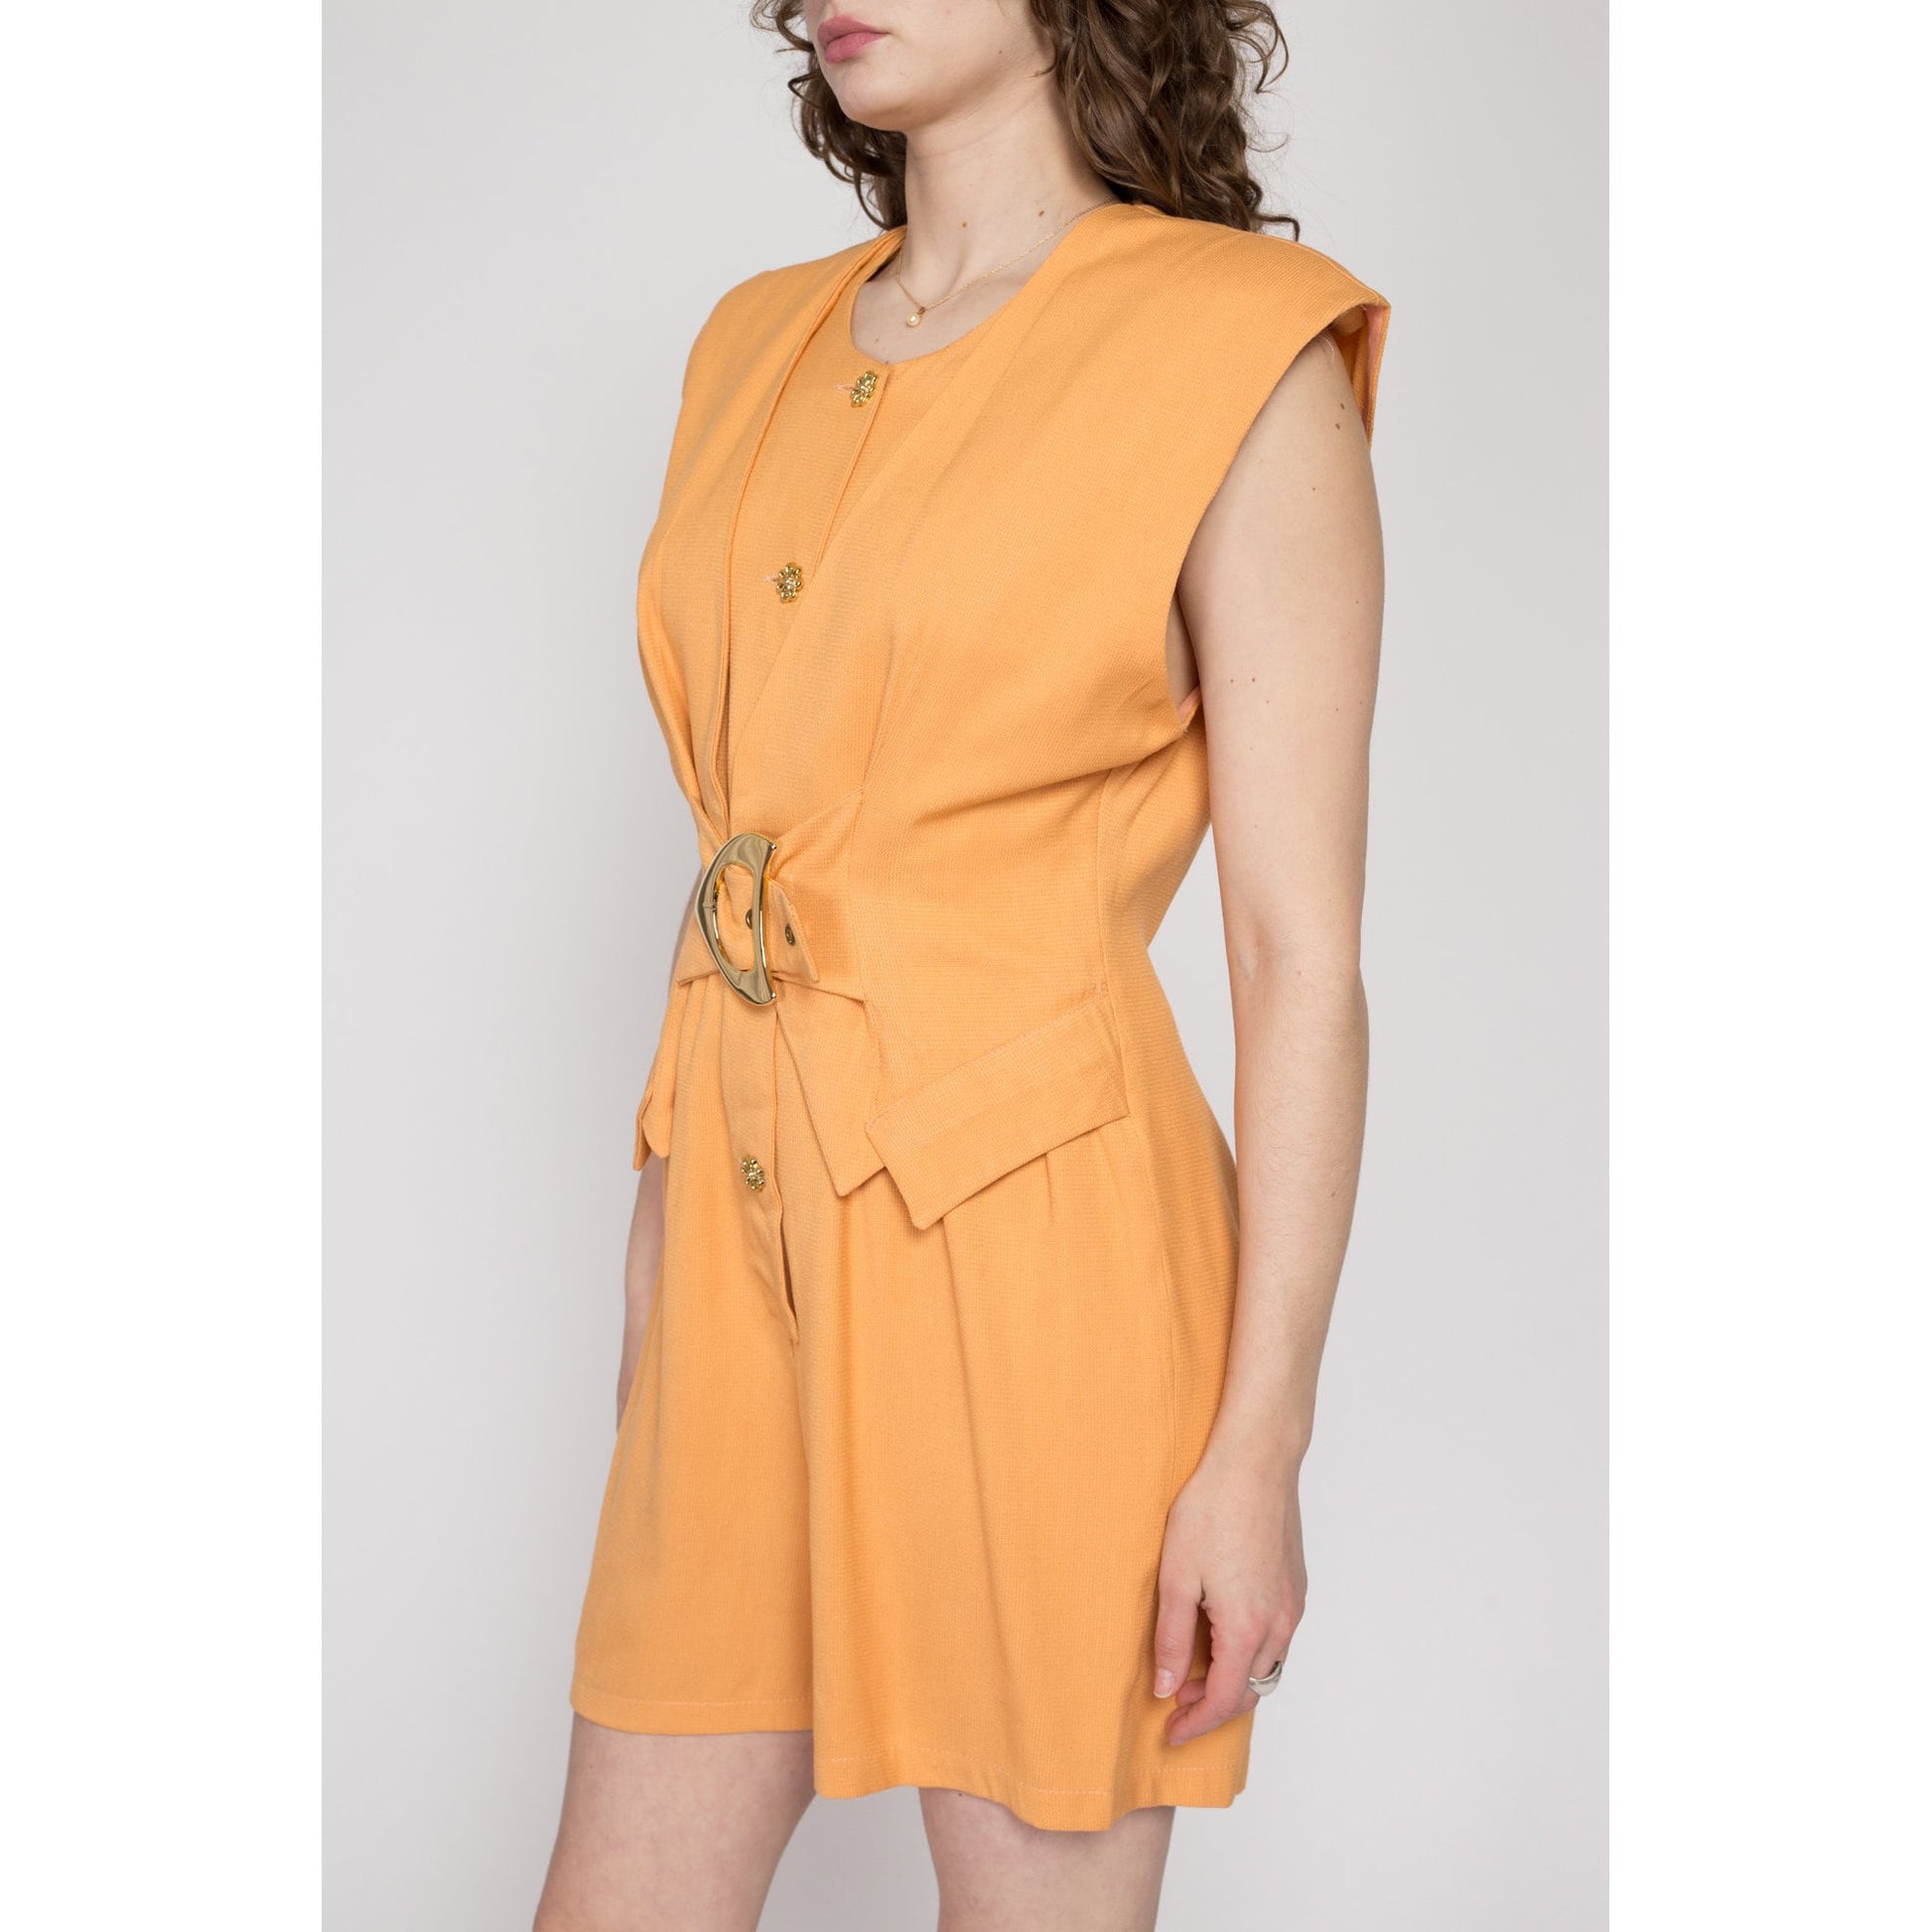 Large Y2K Orange Sherbet Cinched Waist Romper | Vintage Sleeveless Button Front Short One Piece Outfit